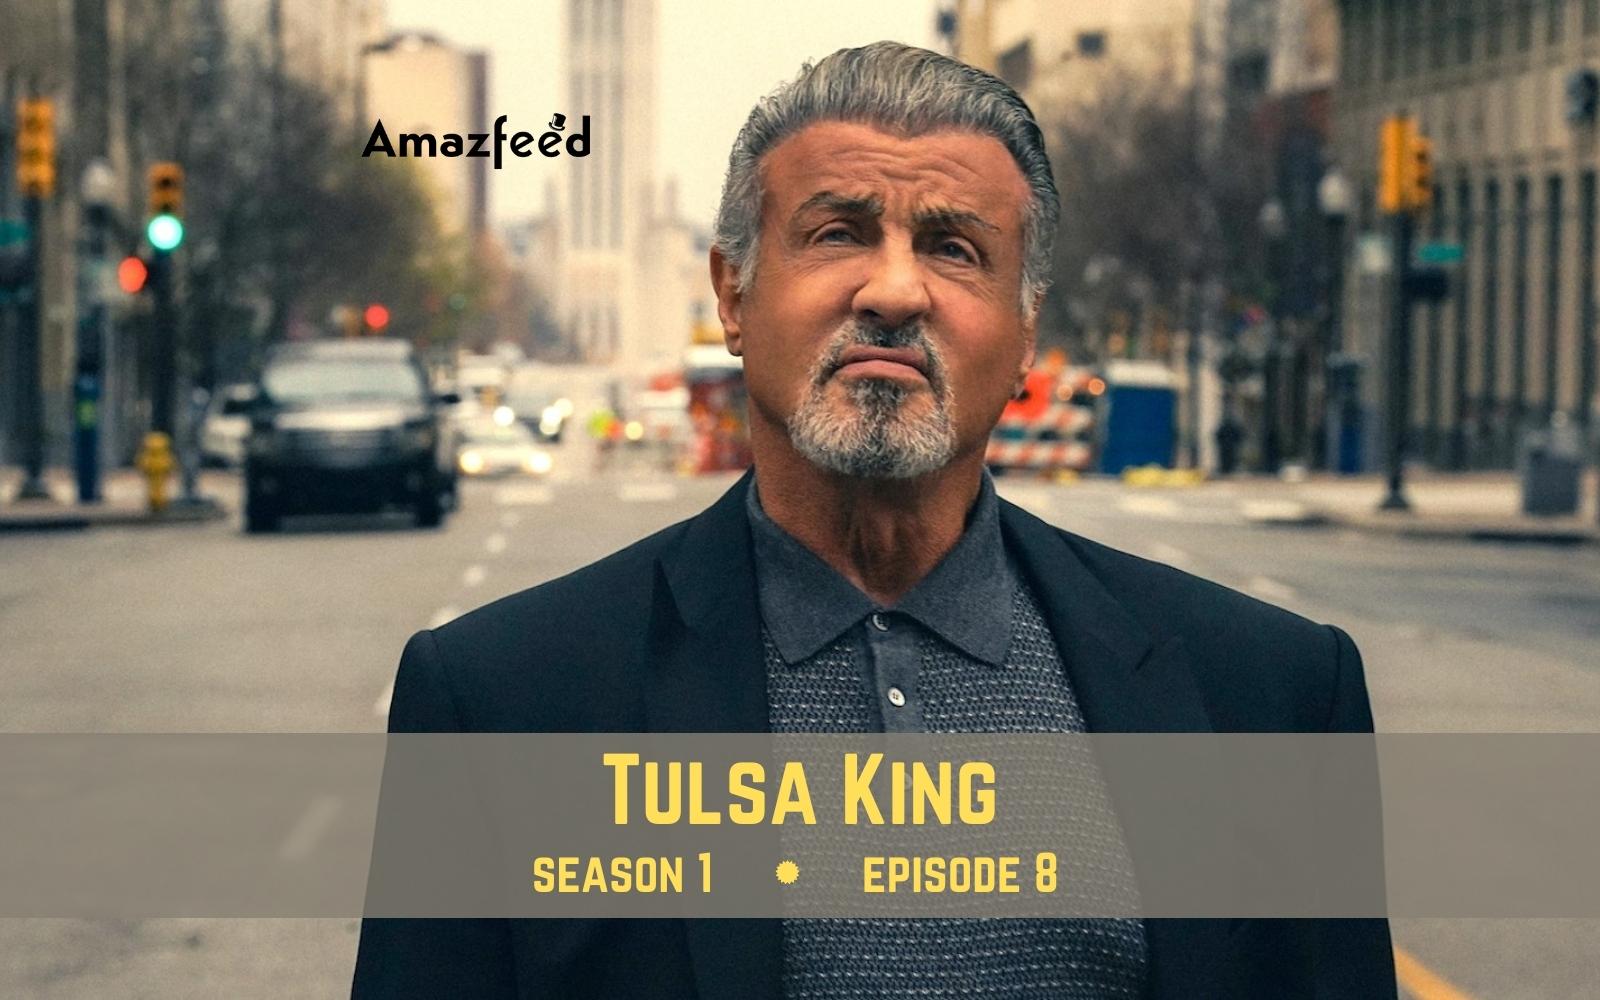 Don't Miss Out on Tulsa King Season 1 Episode 8 Release Date